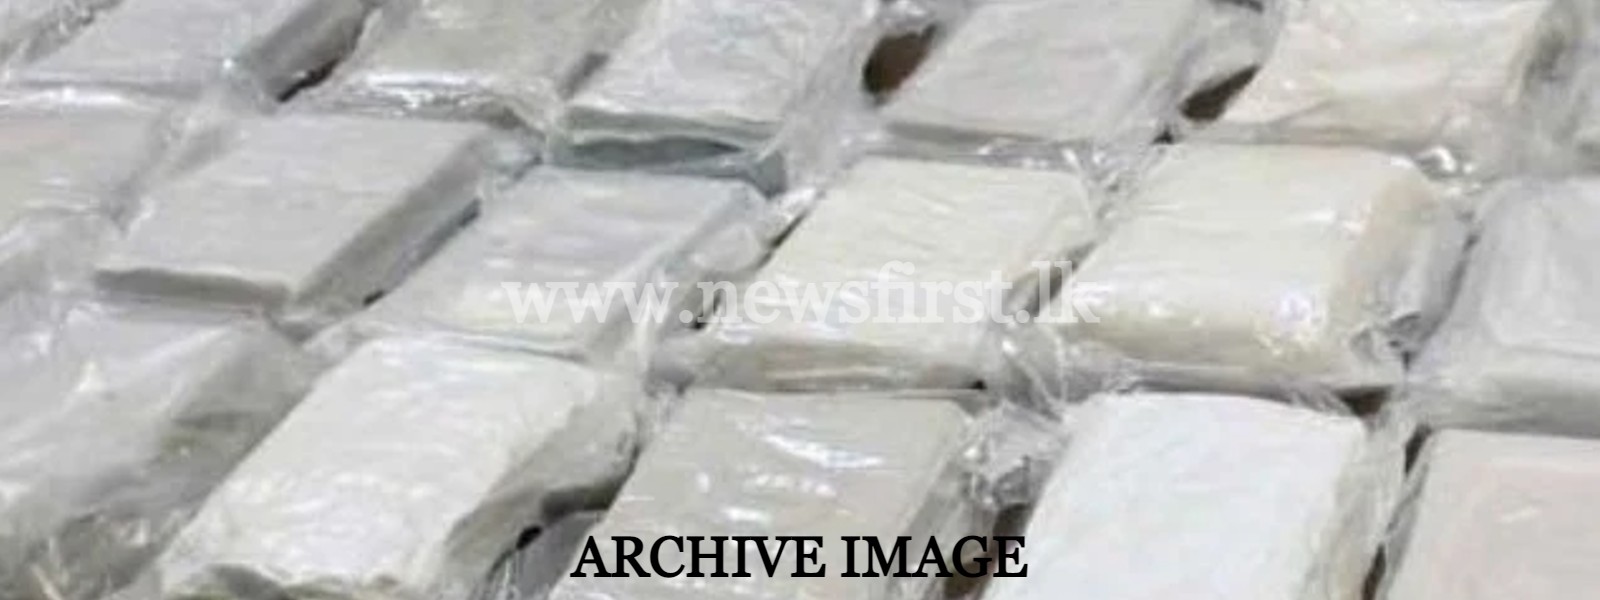 Rs. 6 Billion worth cocaine seized by Customs